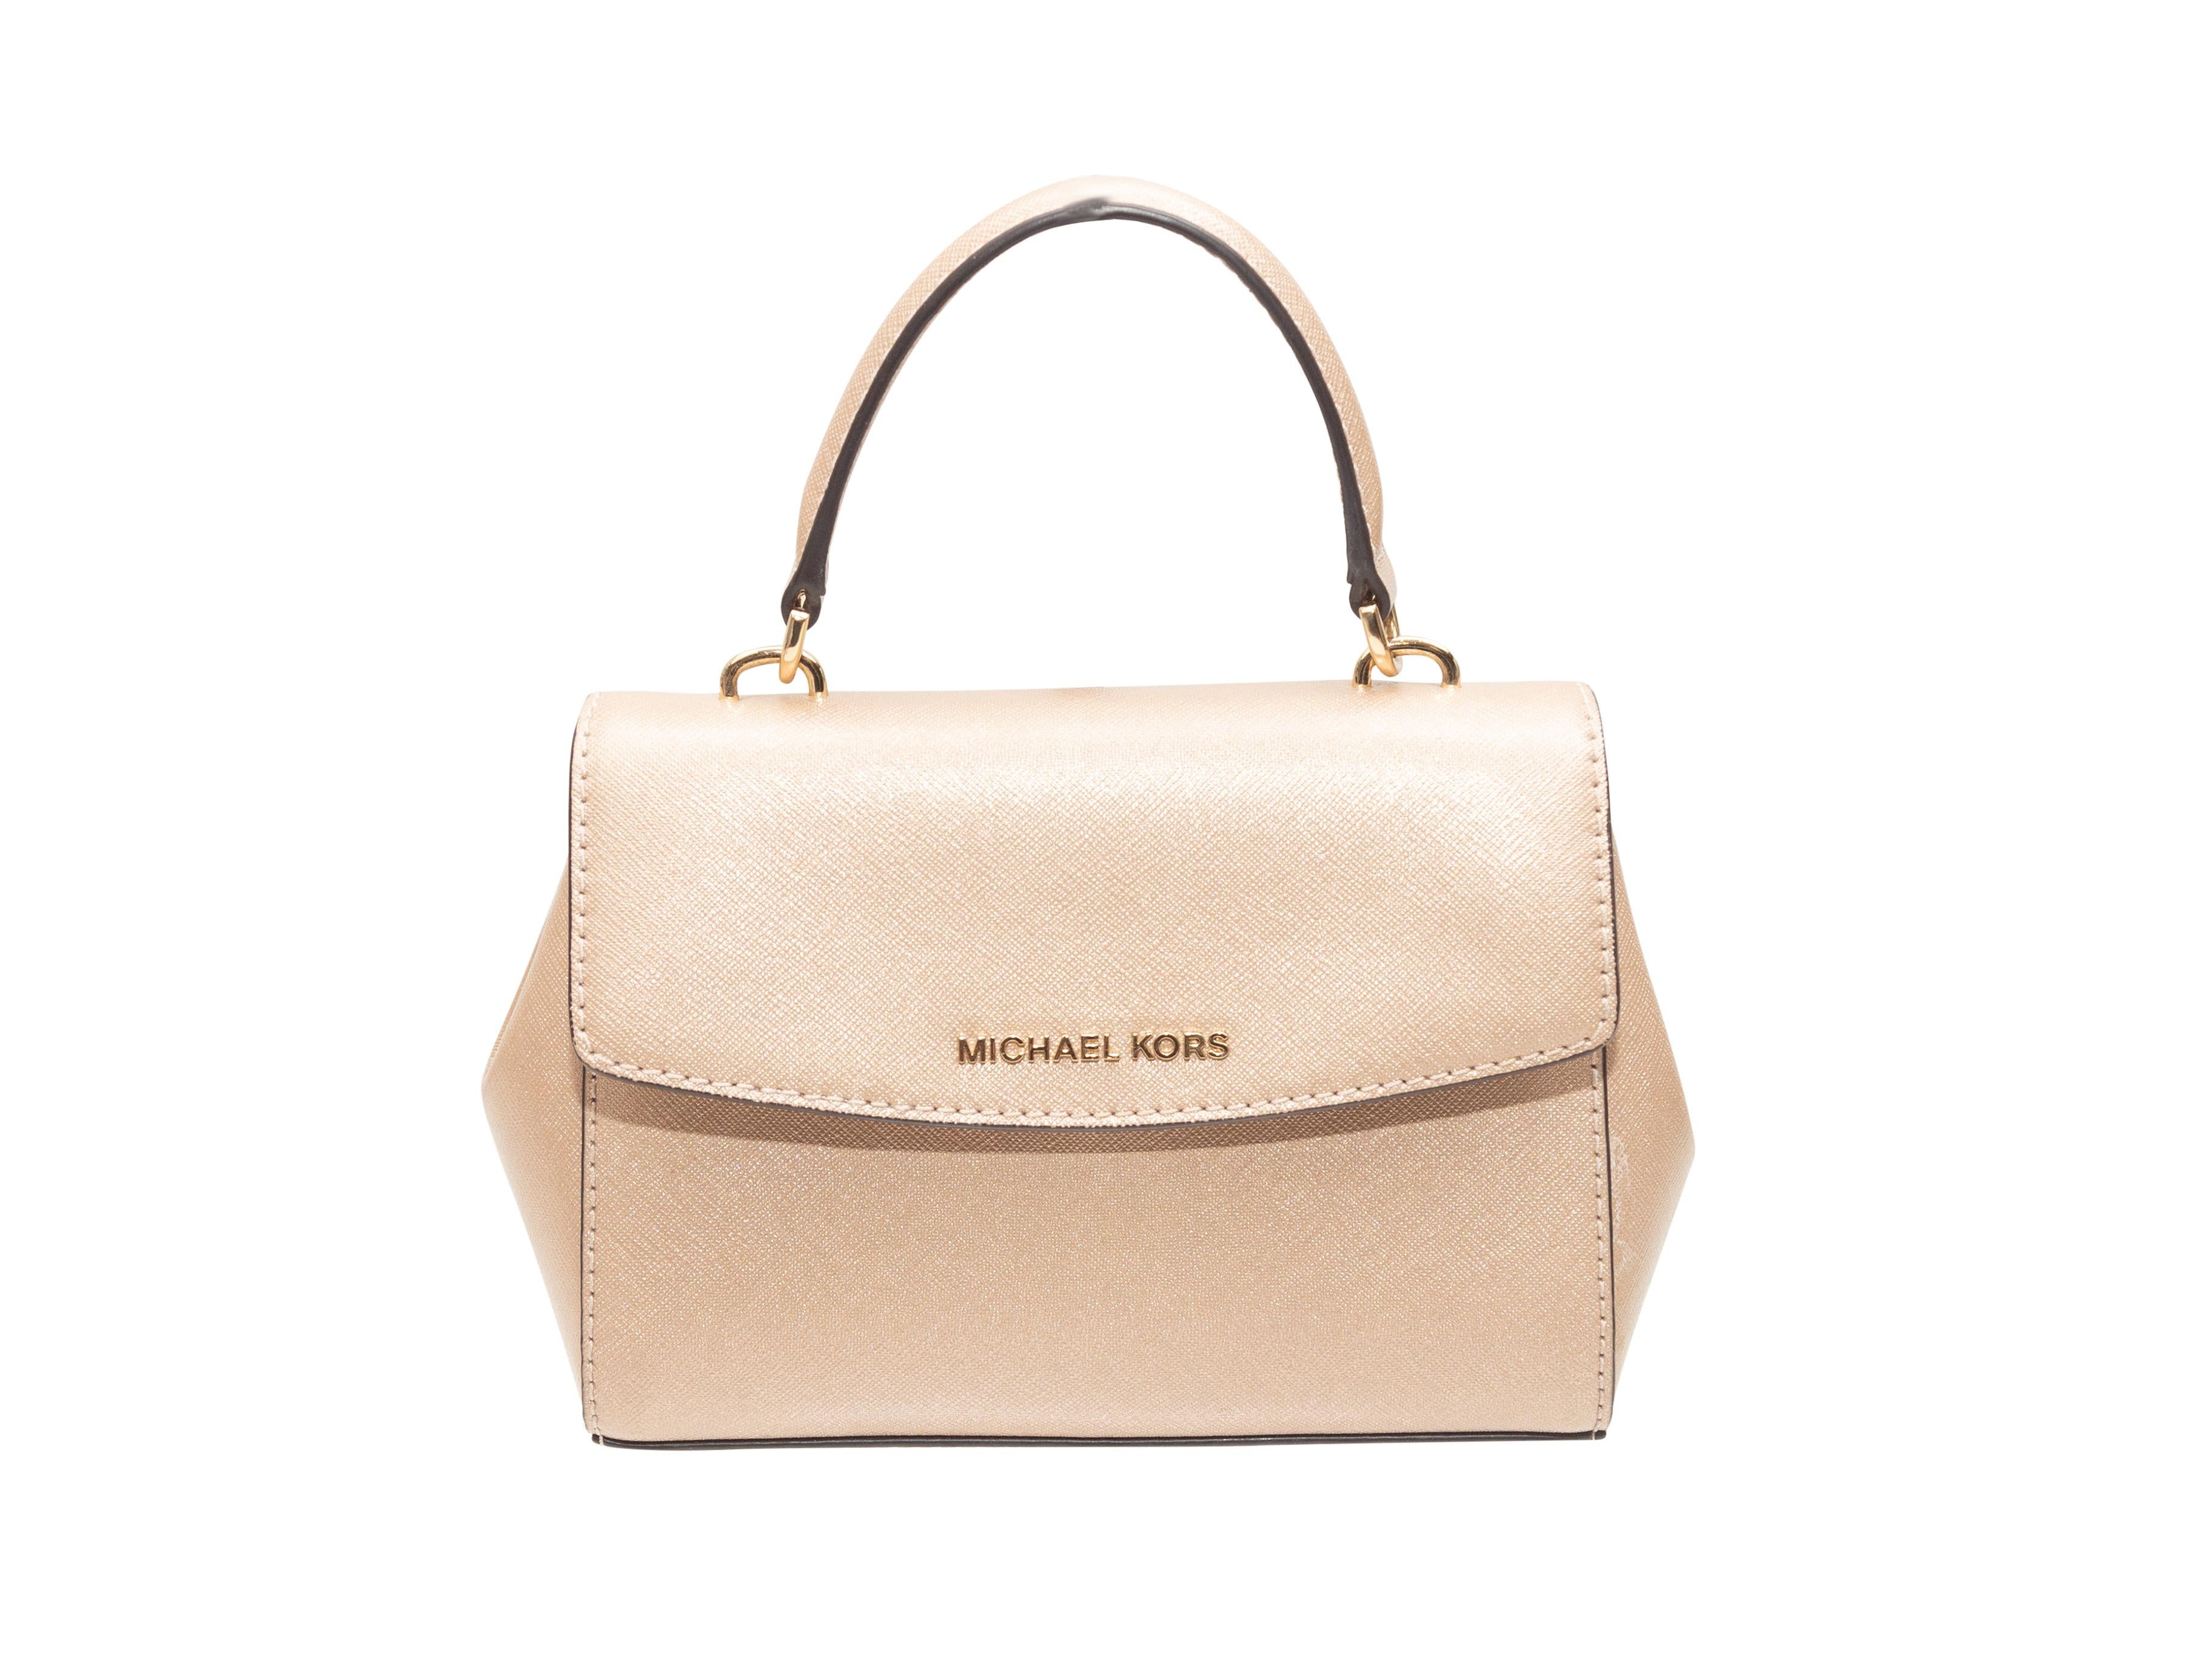 Product Details: Champagne Michael Kors Leather Mini Handbag. This handbag features a leather body, gold-tone hardware, a single top handle, an optional shoulder strap, and front flap closure. 7